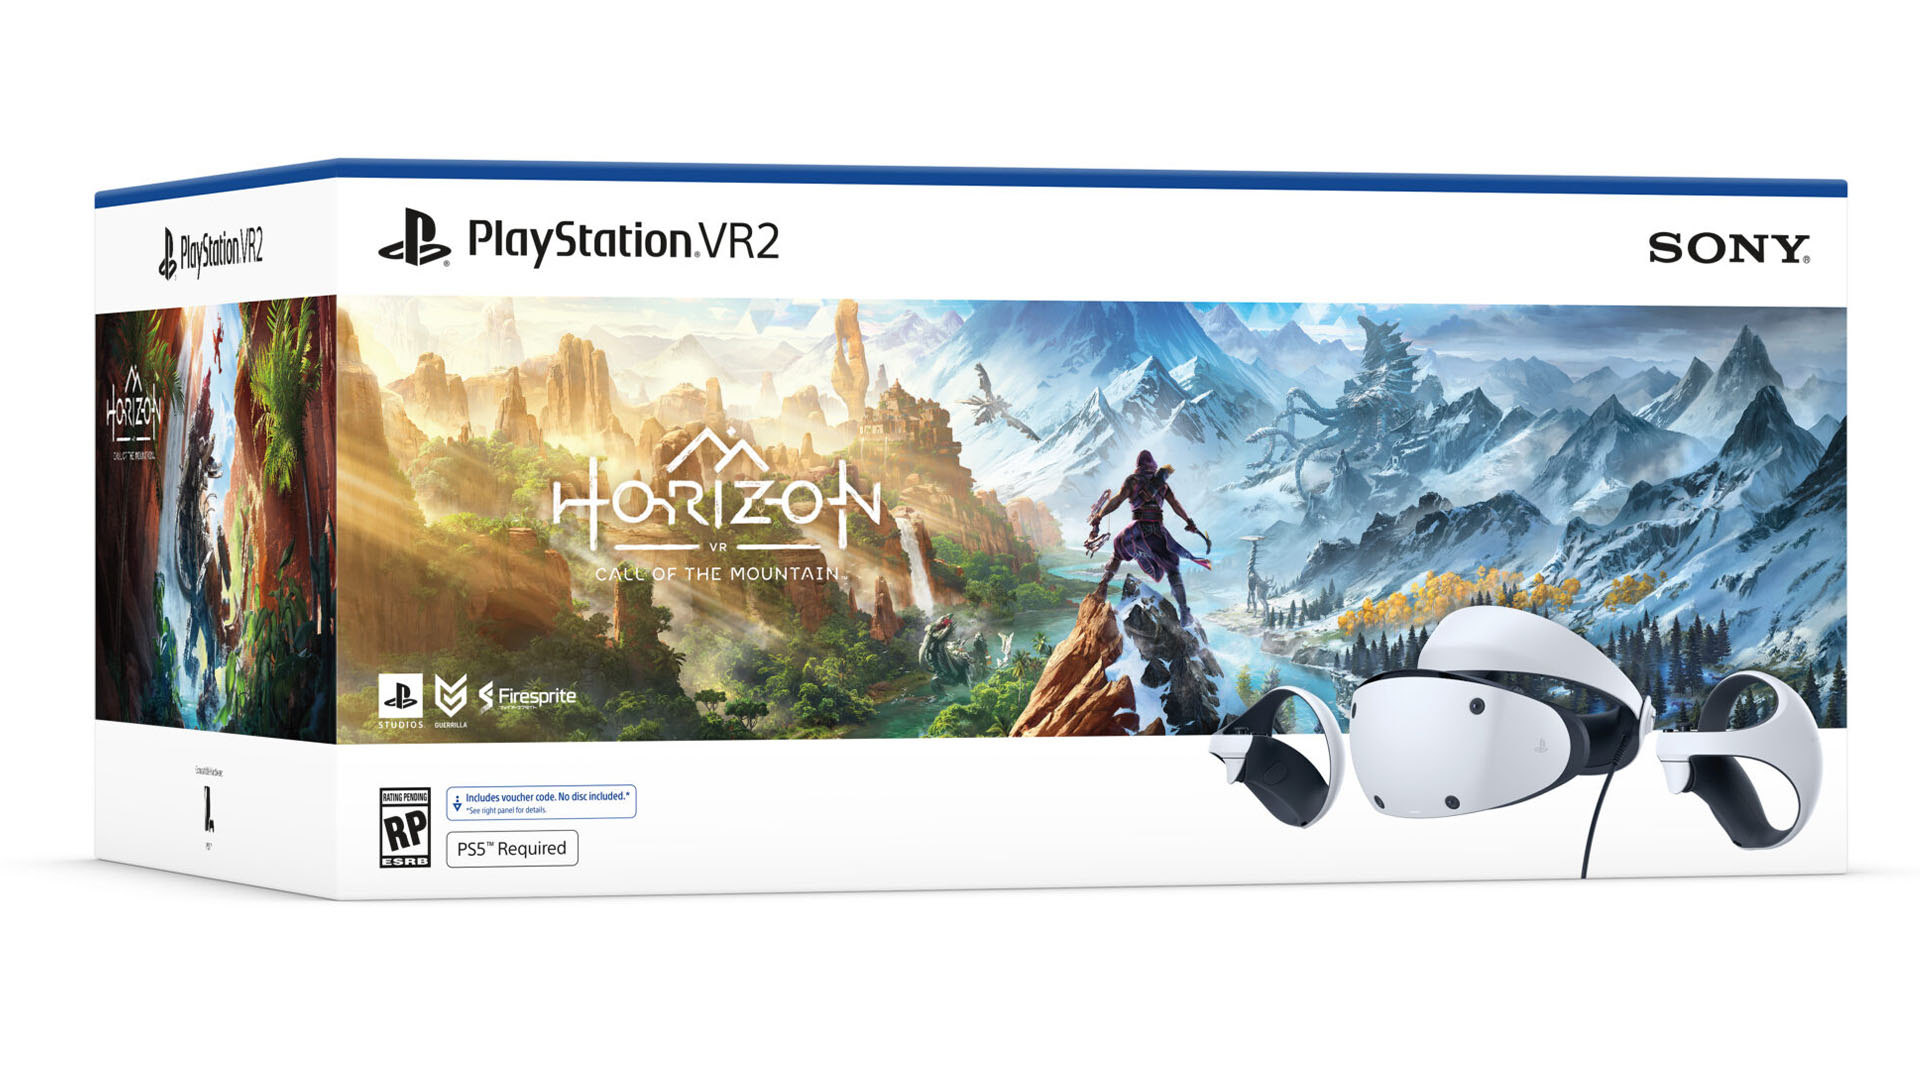 PSVR bundle with Horizon Call of the Mountain